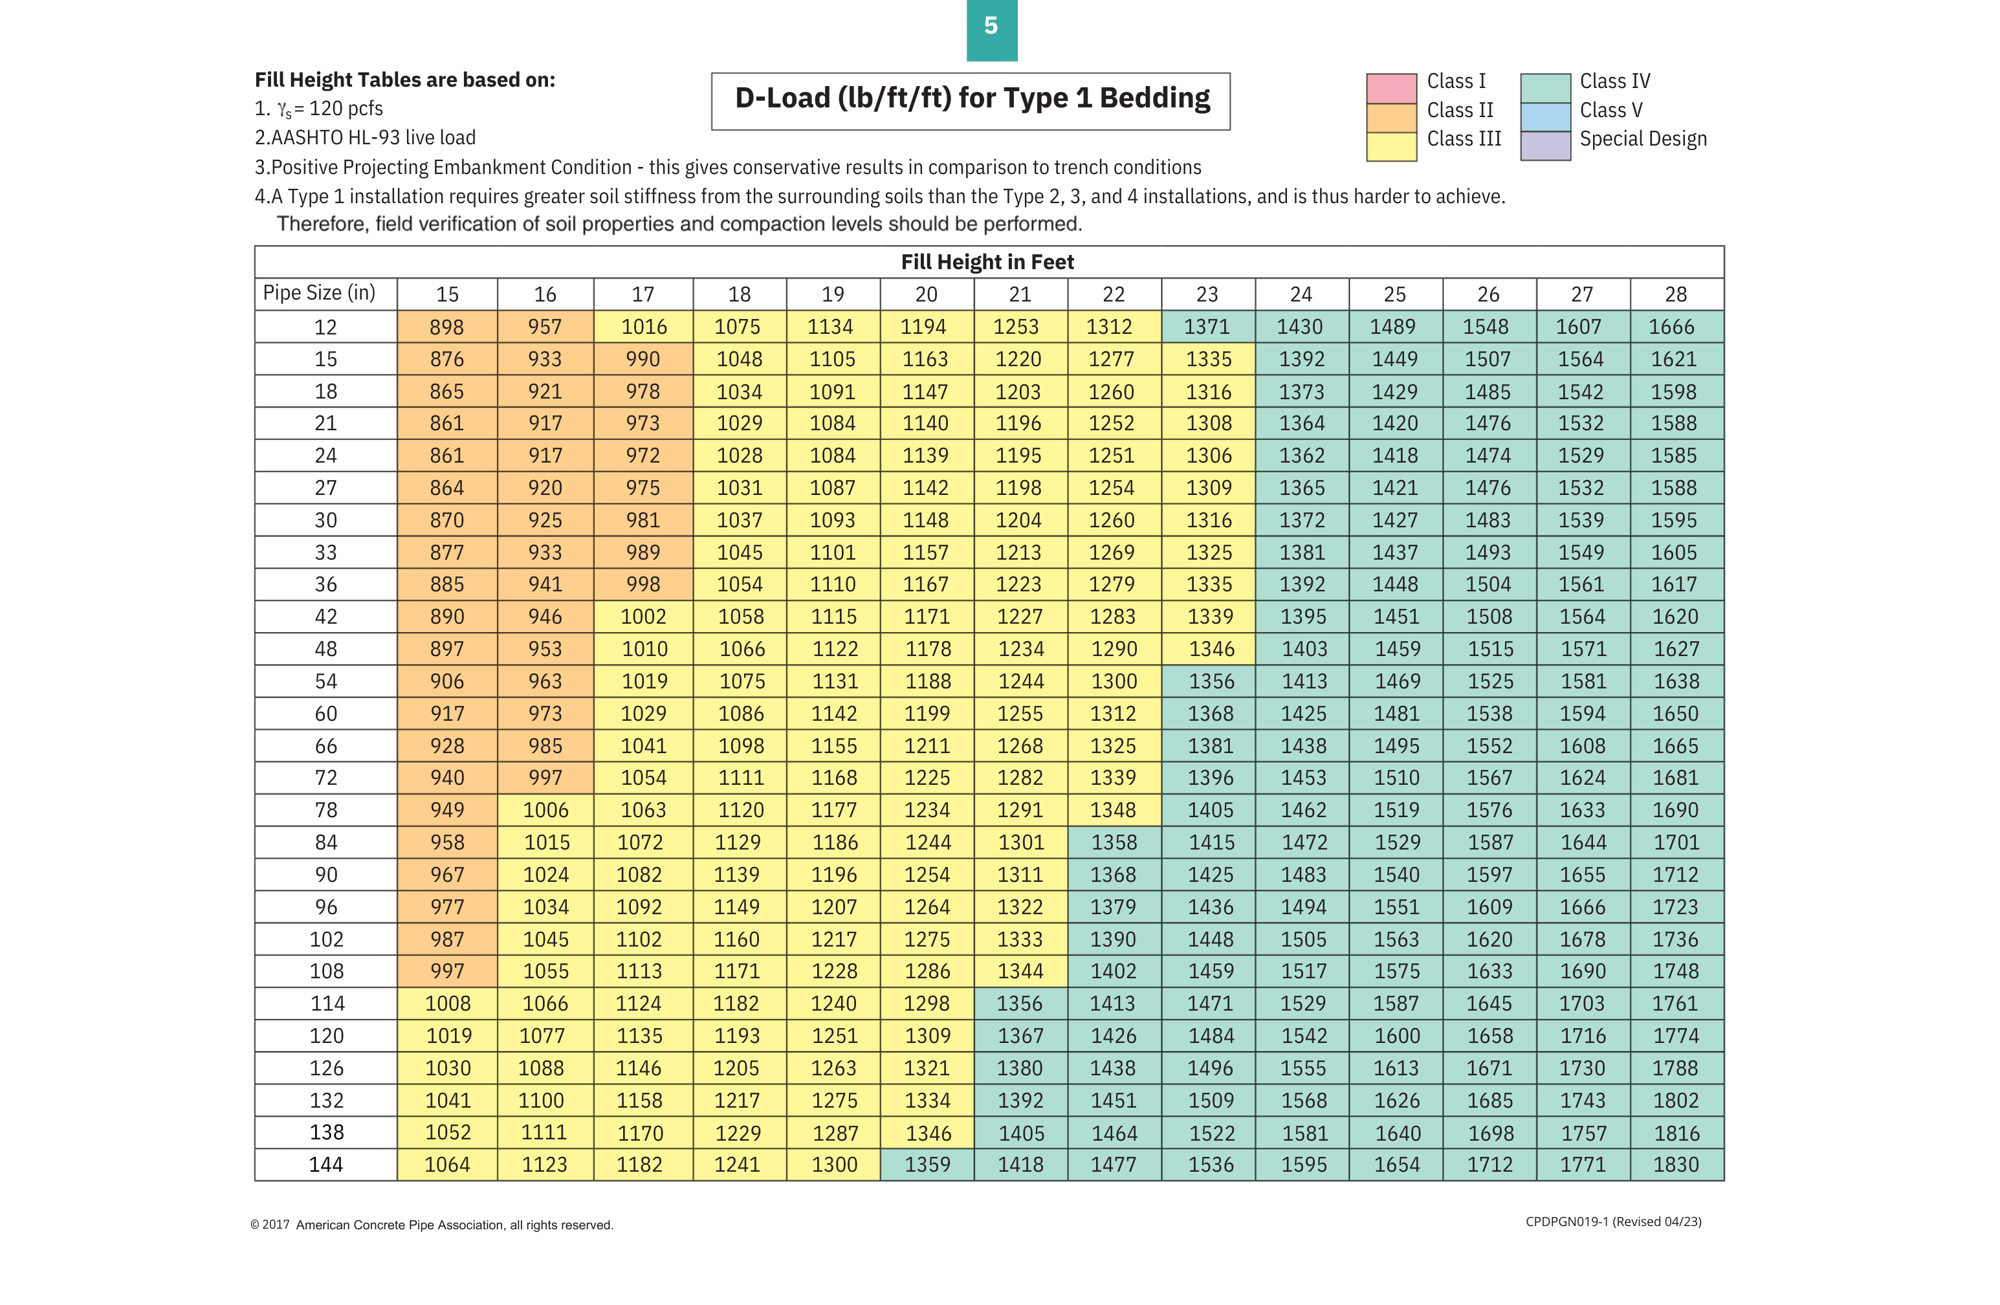 Fill Height Table-Page 5